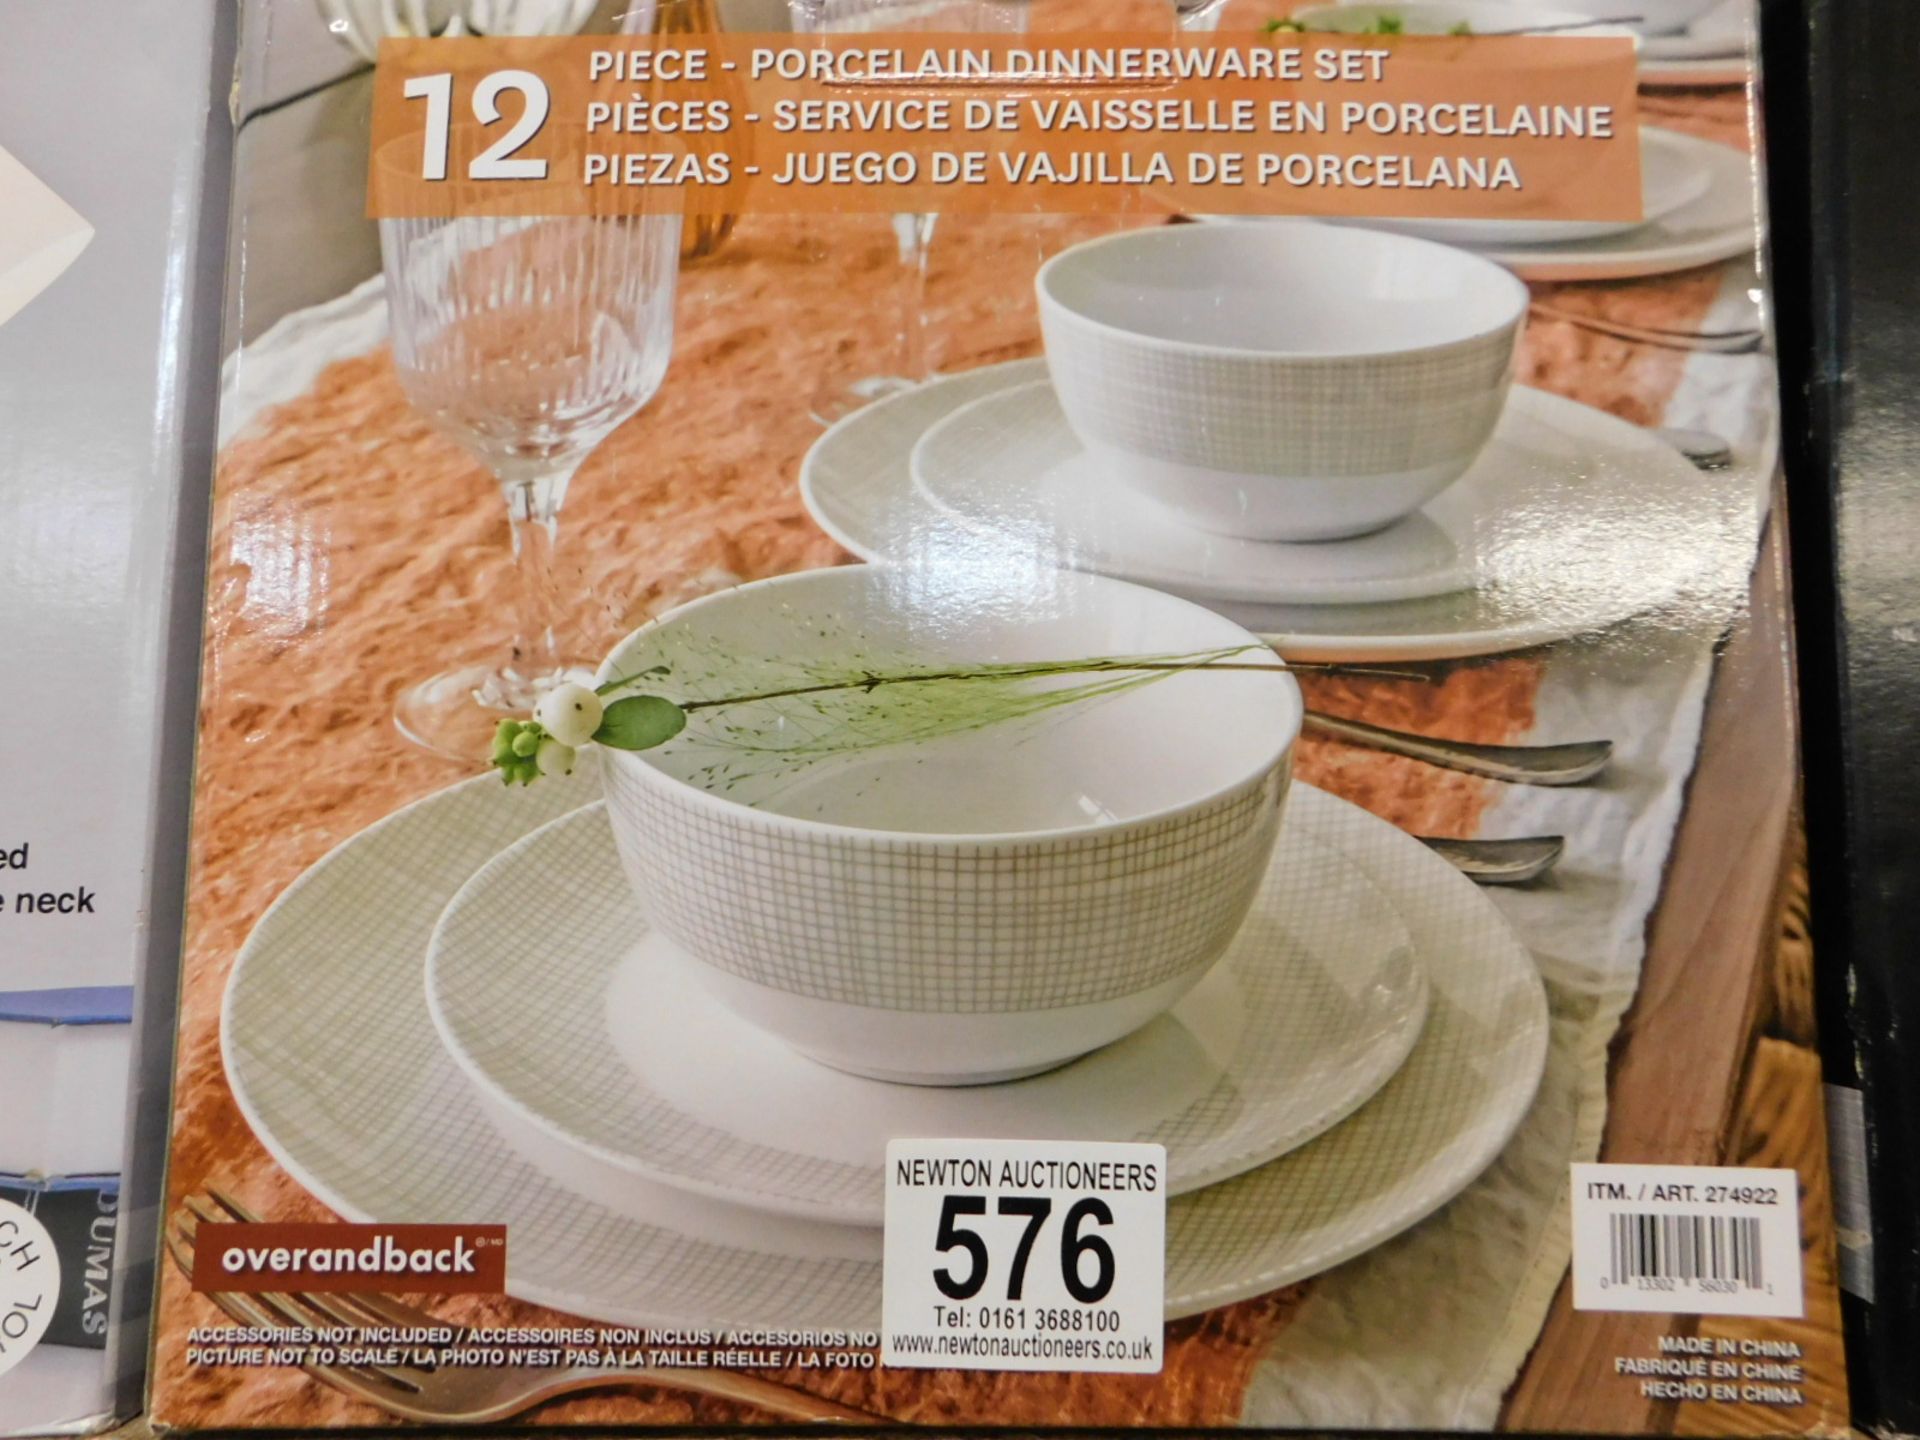 1 BOXED OVER AND BACK CROSSROADS EFFECT 12 PIECE (APPROX) PORCELAIN DINNERWARE SET RRP Â£49.99